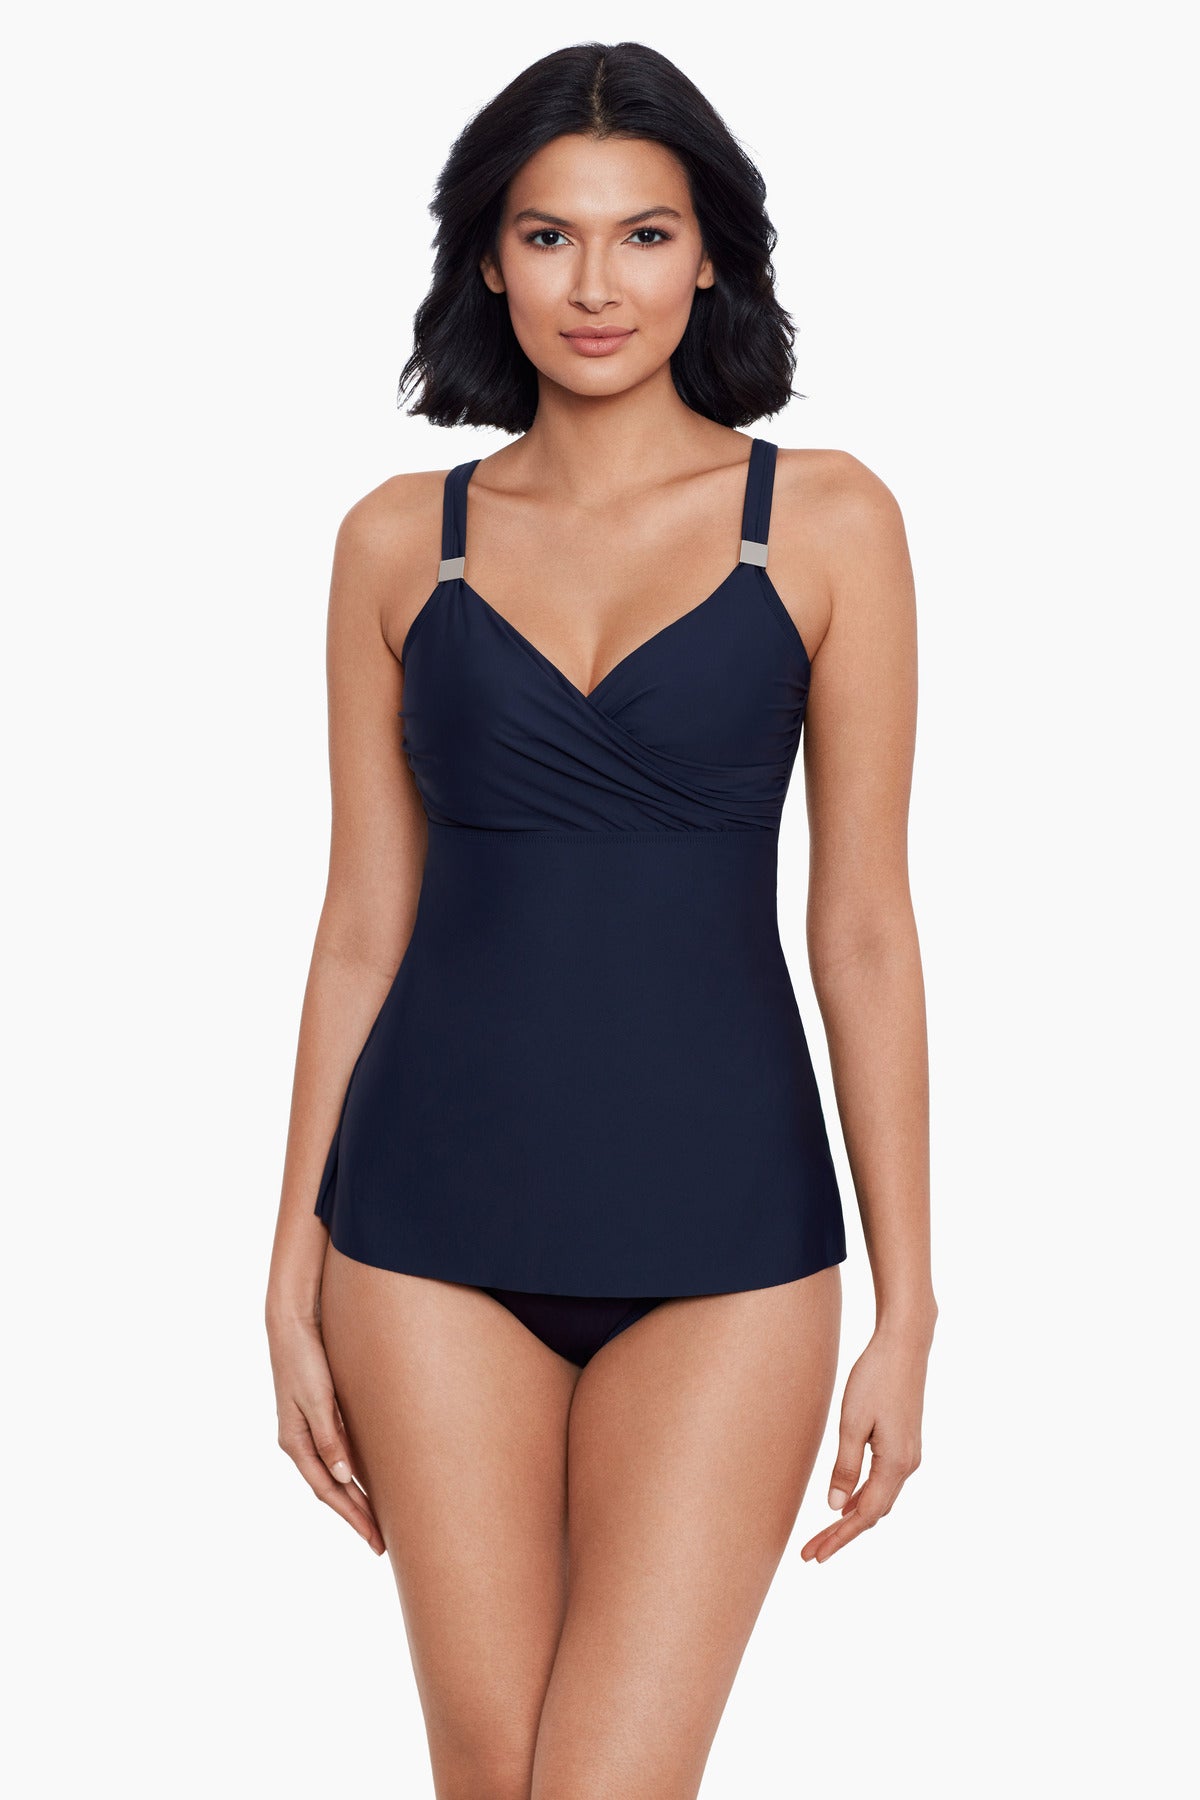 Miraclesuit Must Haves Oceanus Black One Piece DDD-Cup